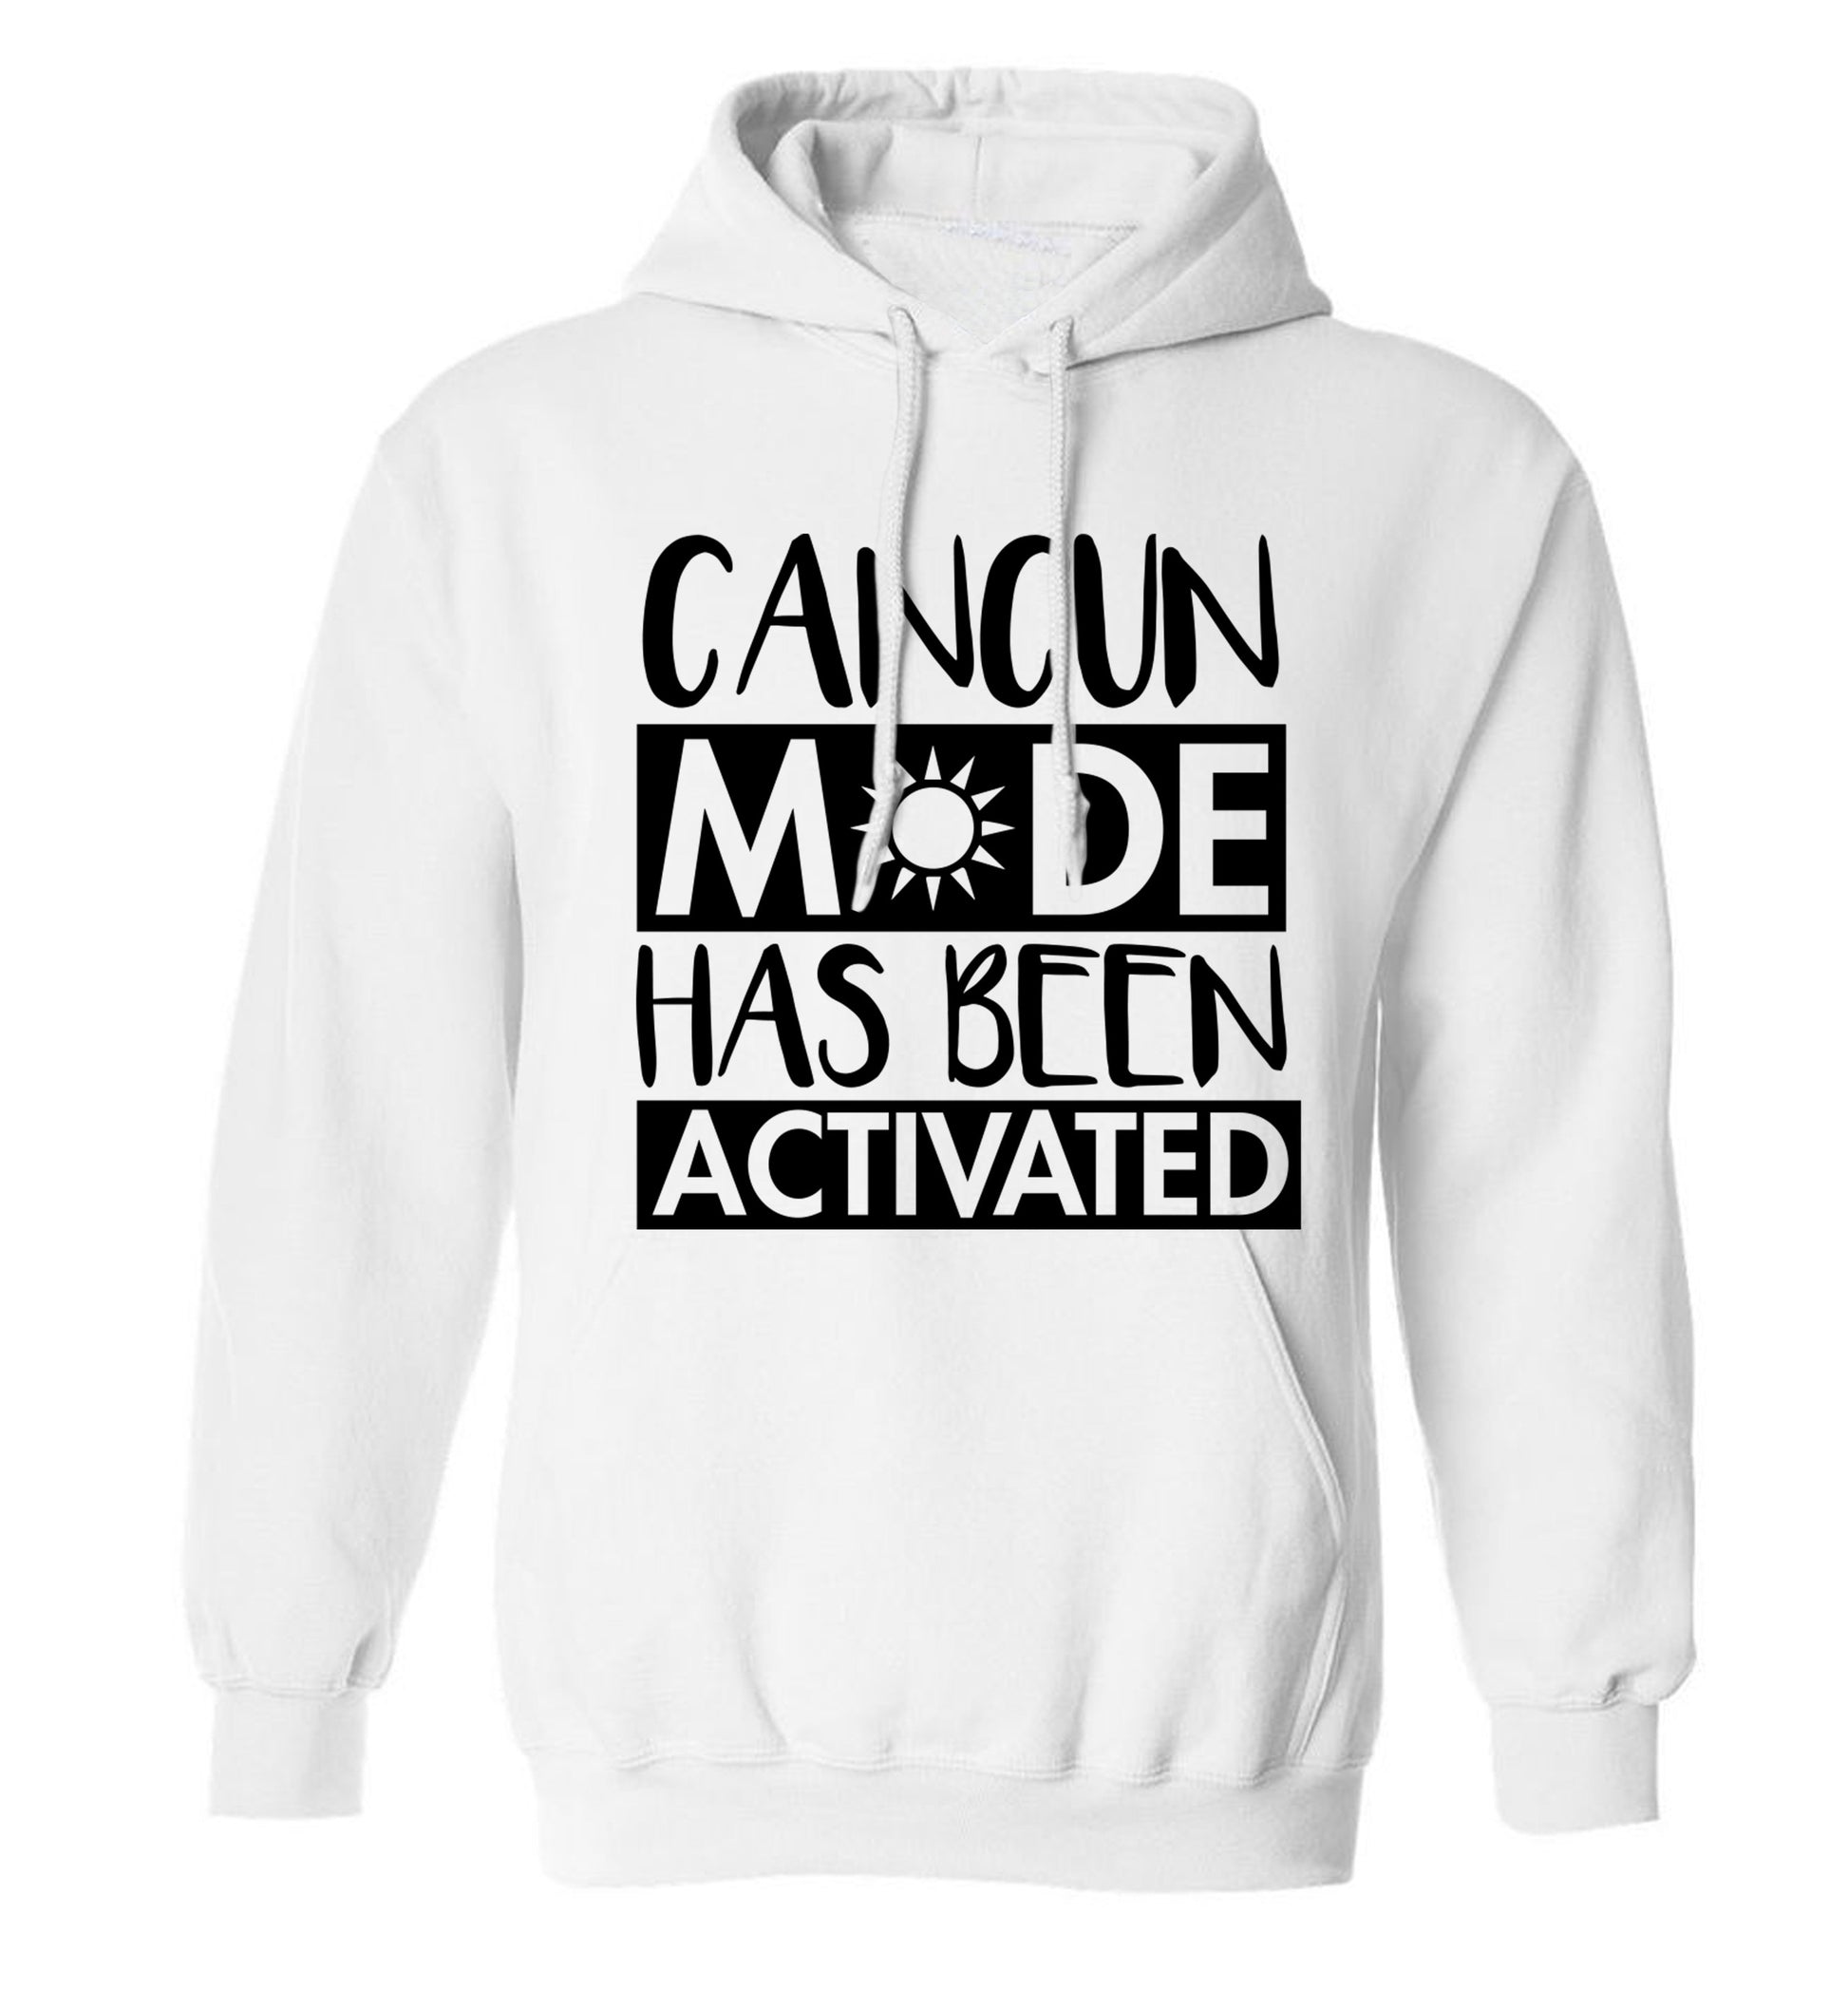 Cancun mode has been activated adults unisex white hoodie 2XL